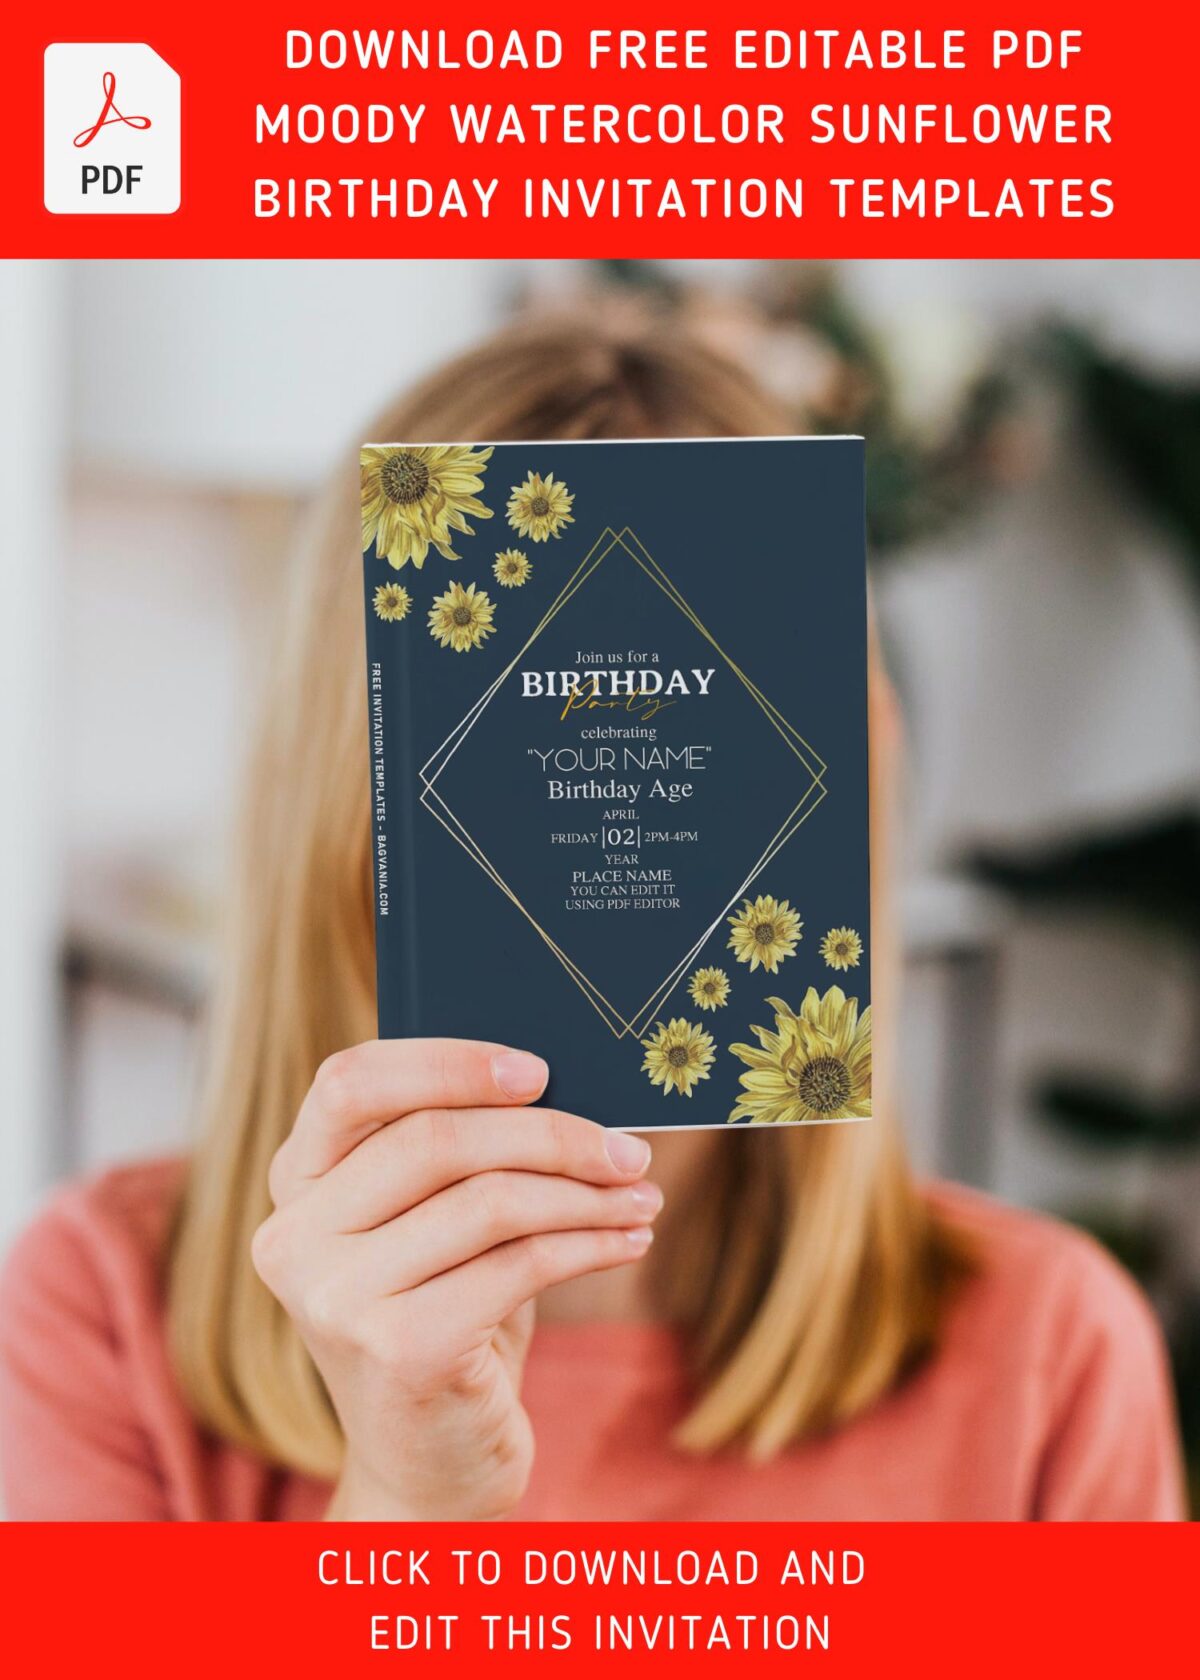 (Free Editable PDF) Moody Warm Summer Sunflower Invitation Templates with gorgeous summer flowers